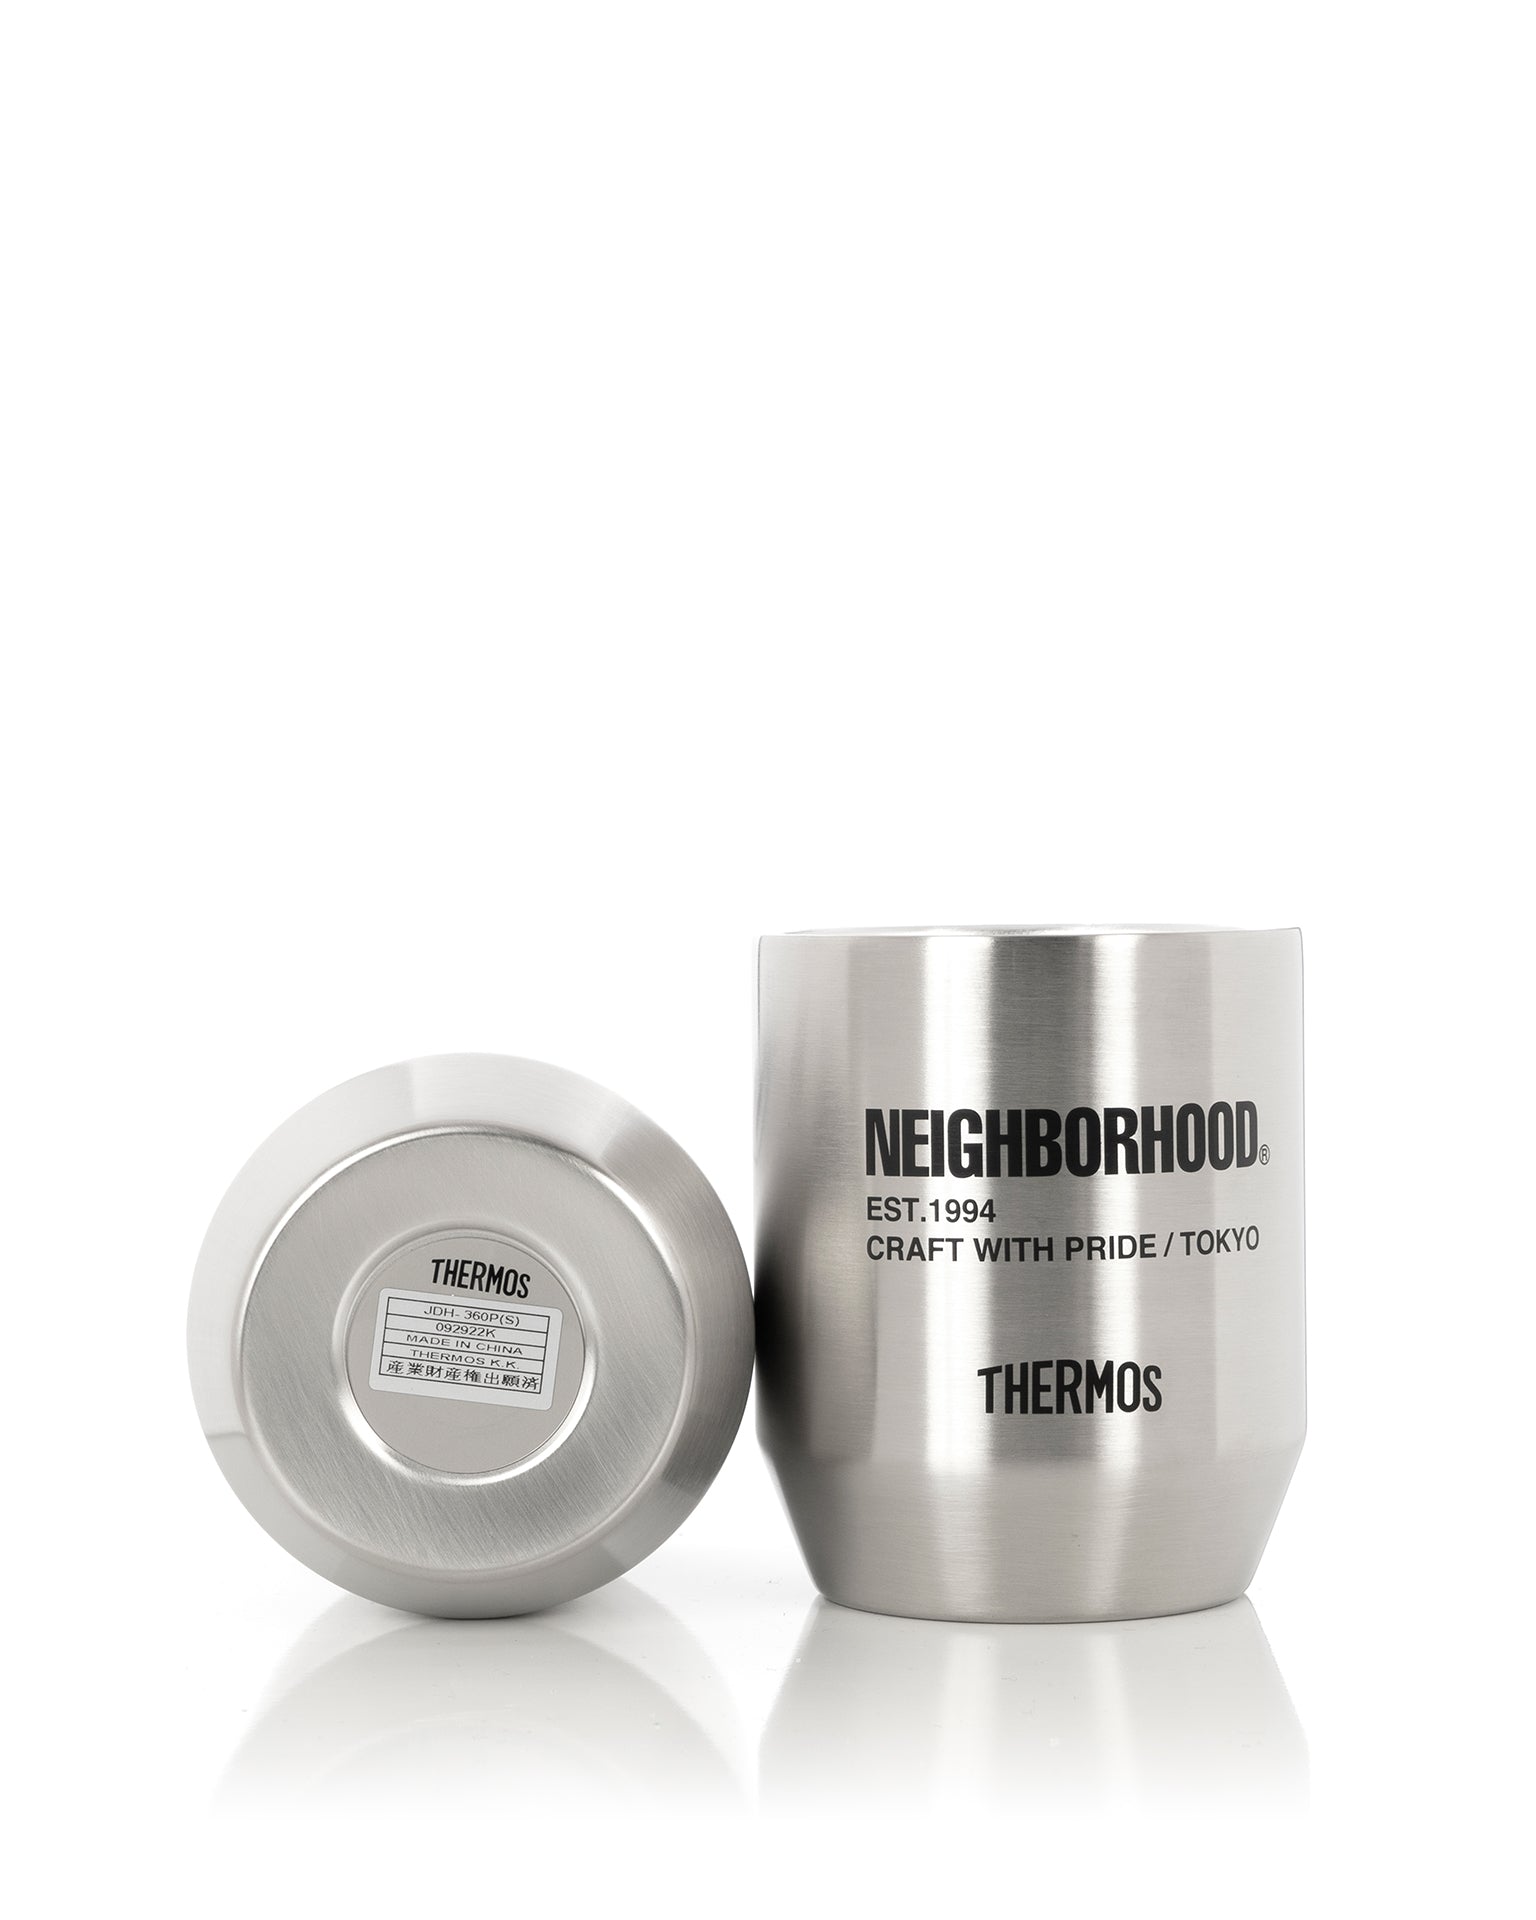 NH X THERMOS . JDH-360P CUP SET + BOTTLE新品未使用です